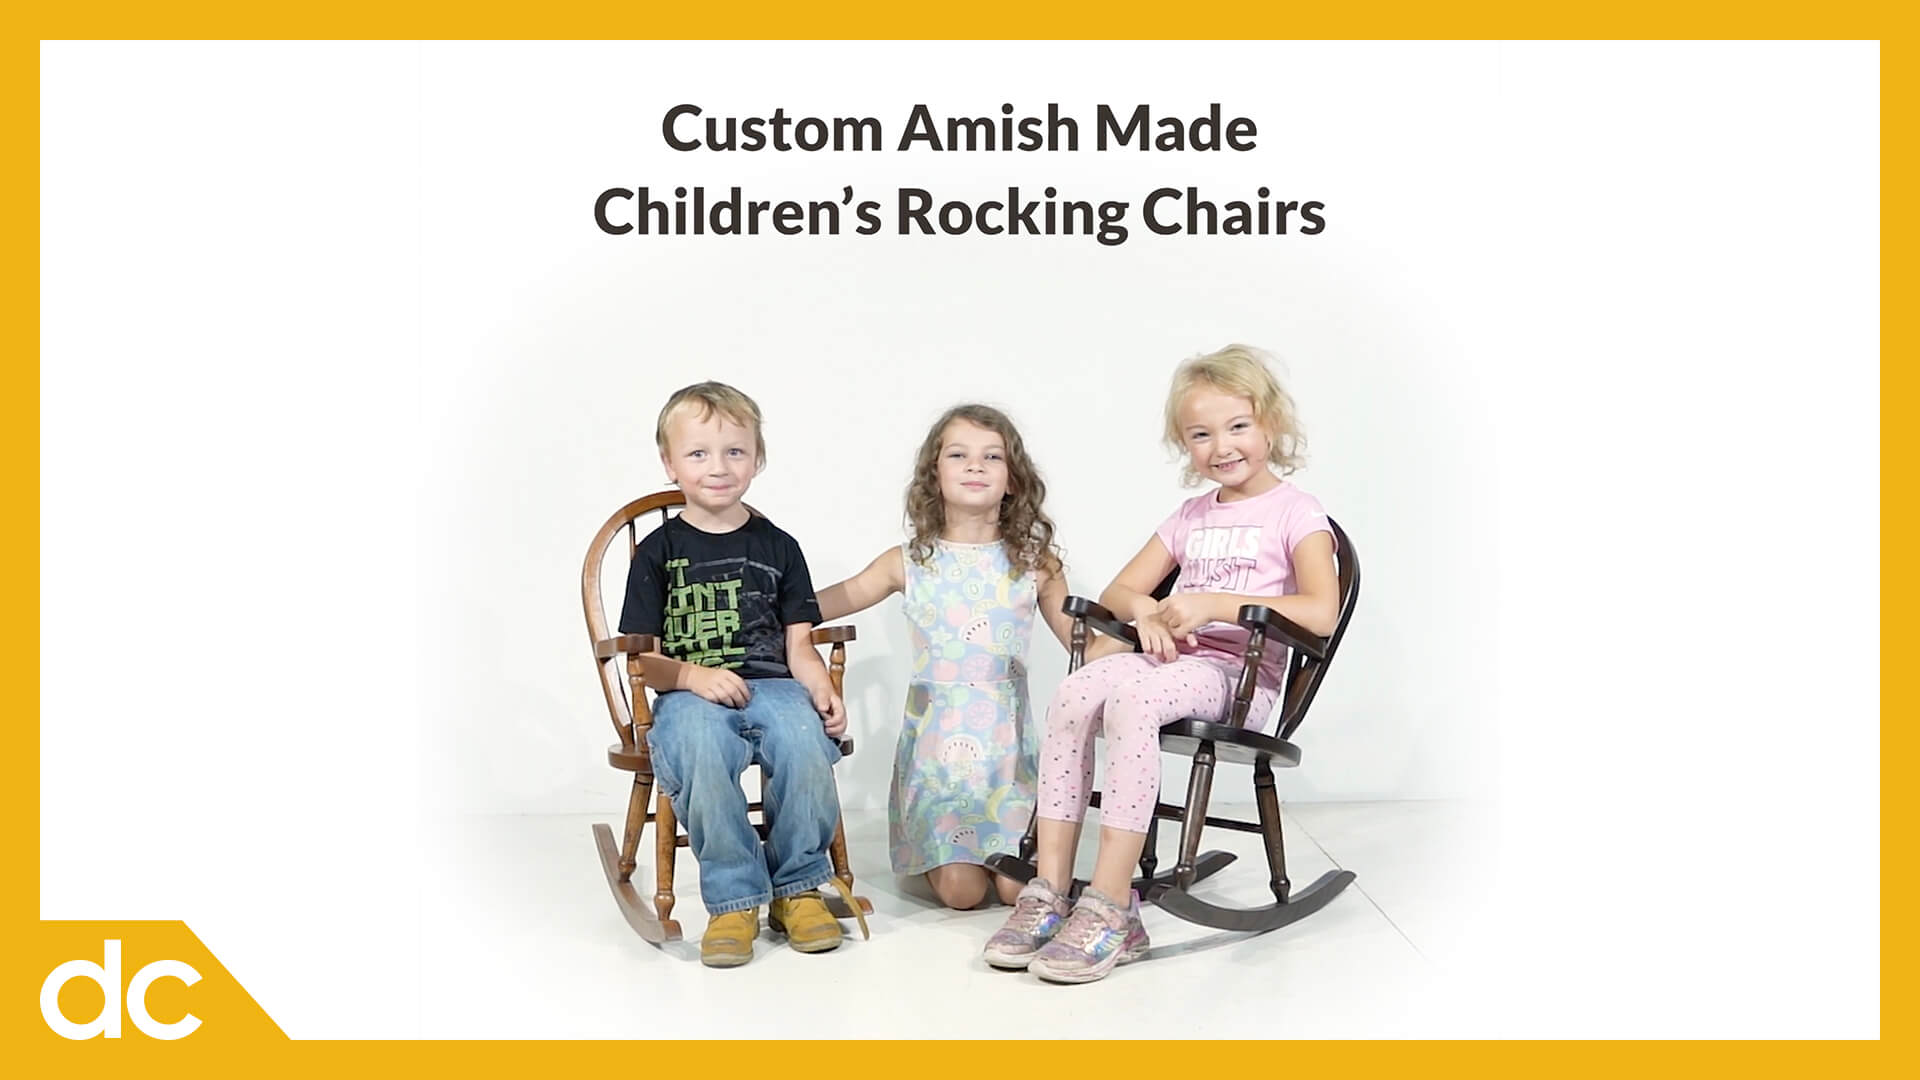 Custom Amish Made Children's Rocking Chairs Video Title